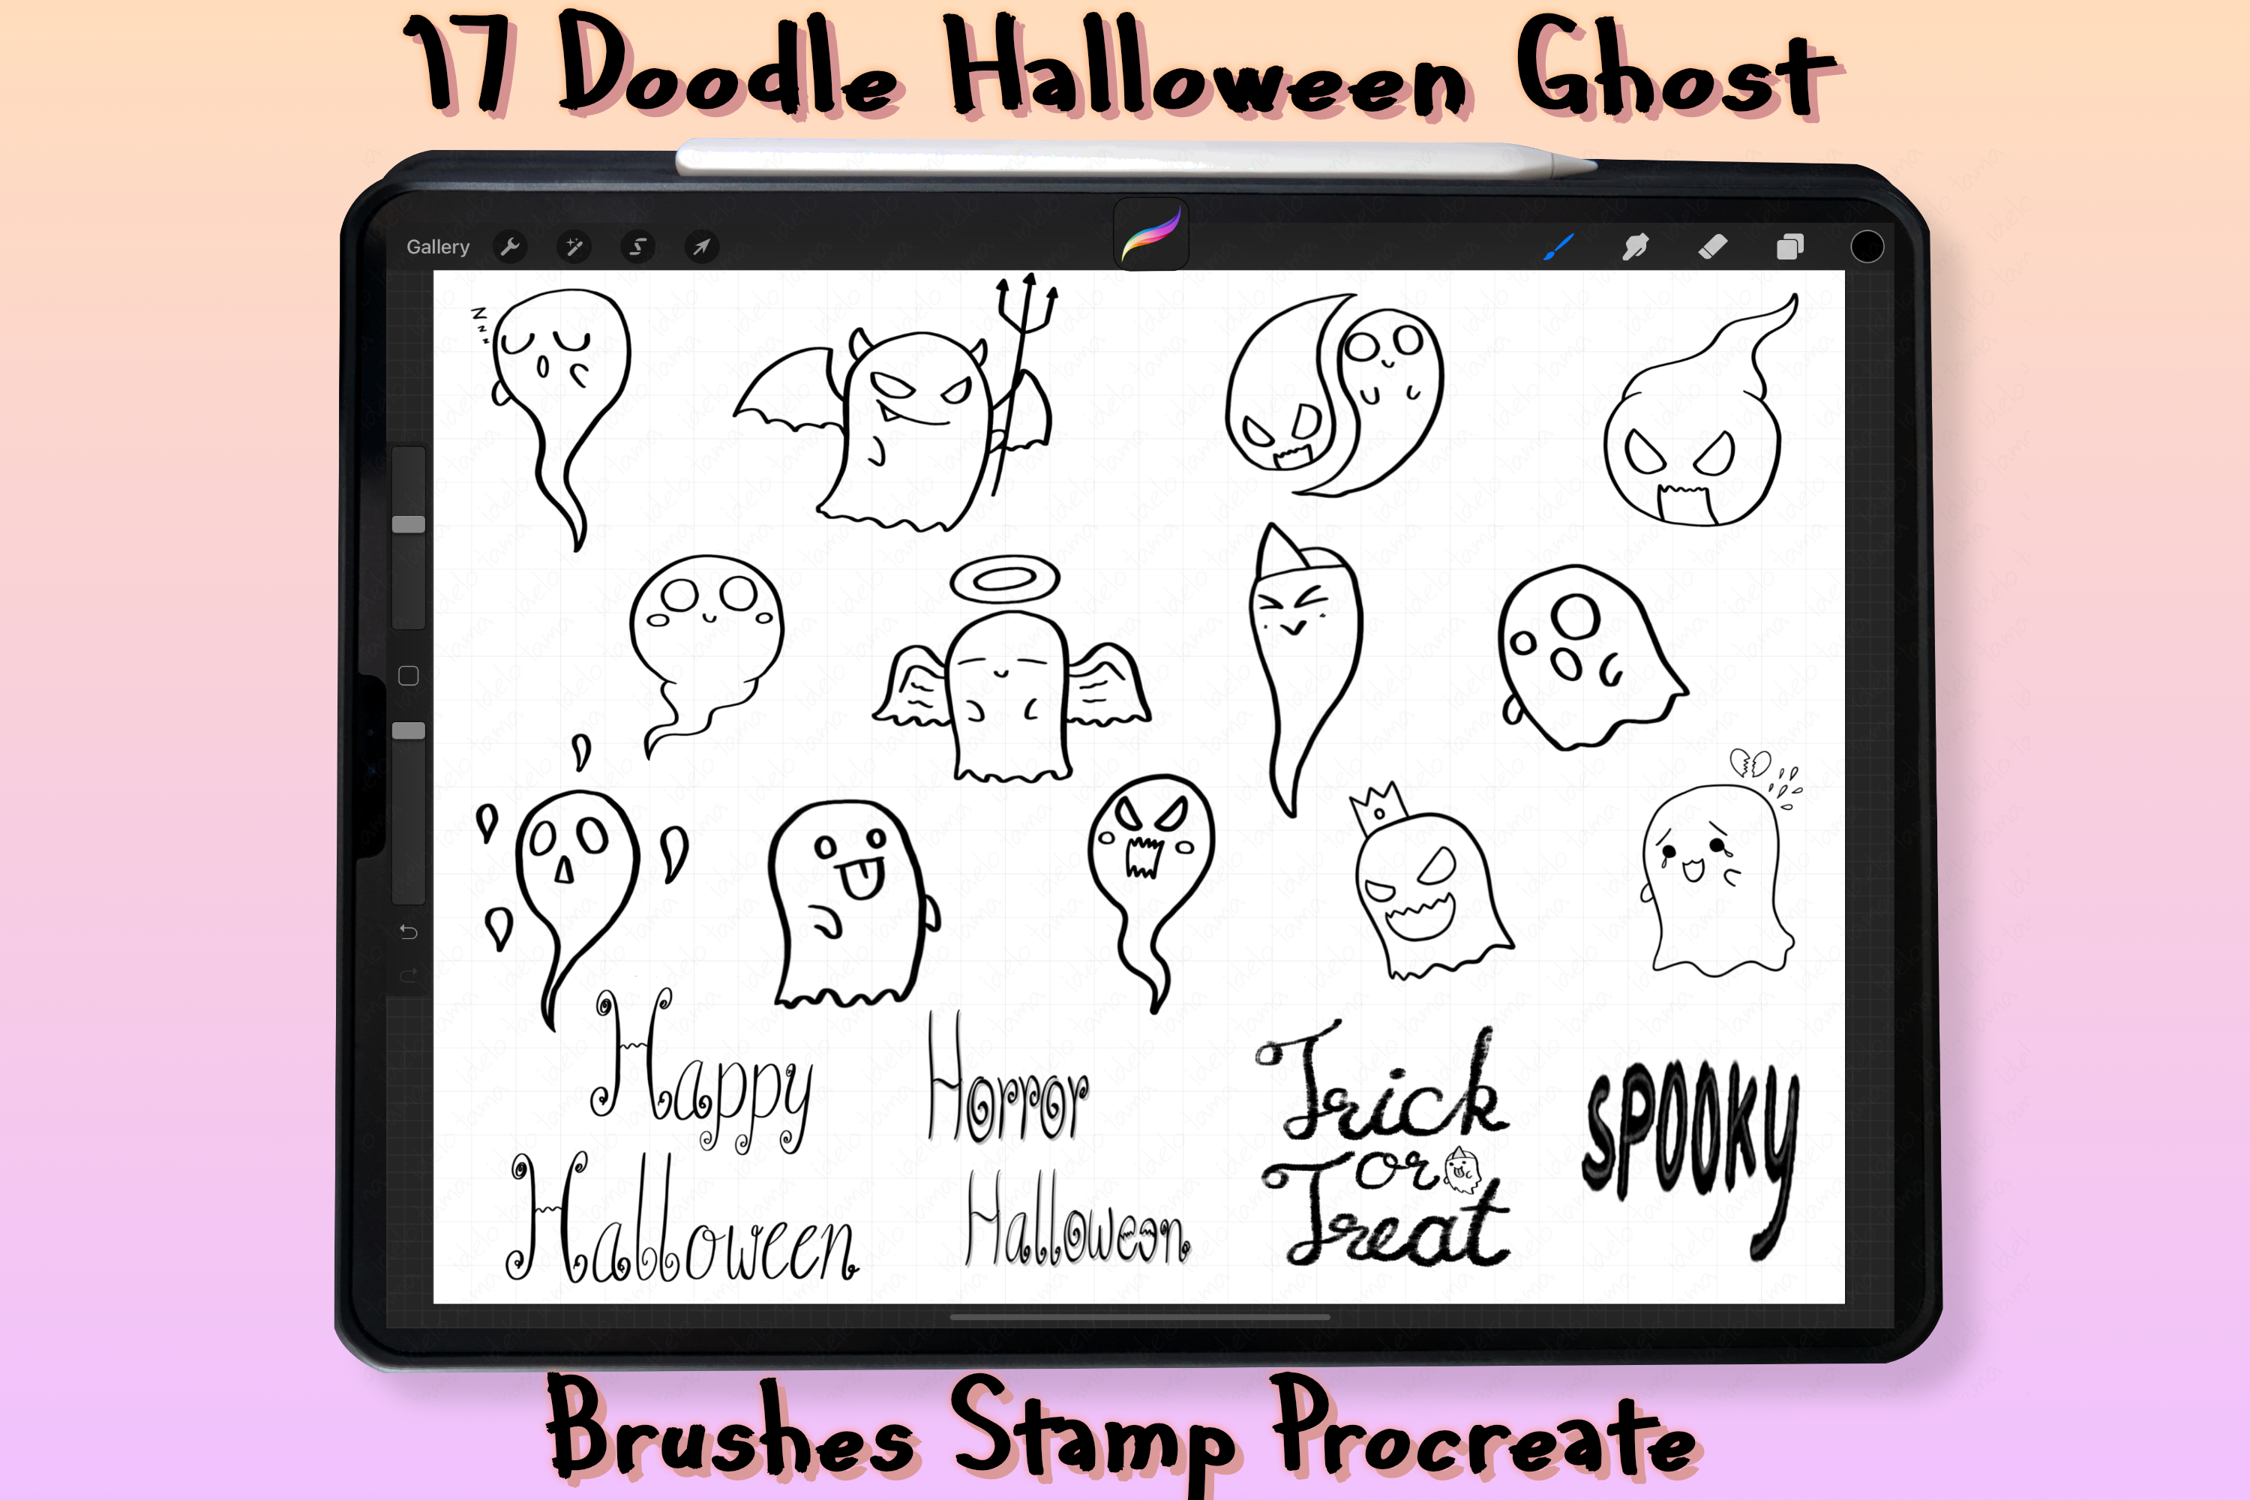 Procreate Doodle Halloween Ghost Brush Stamps